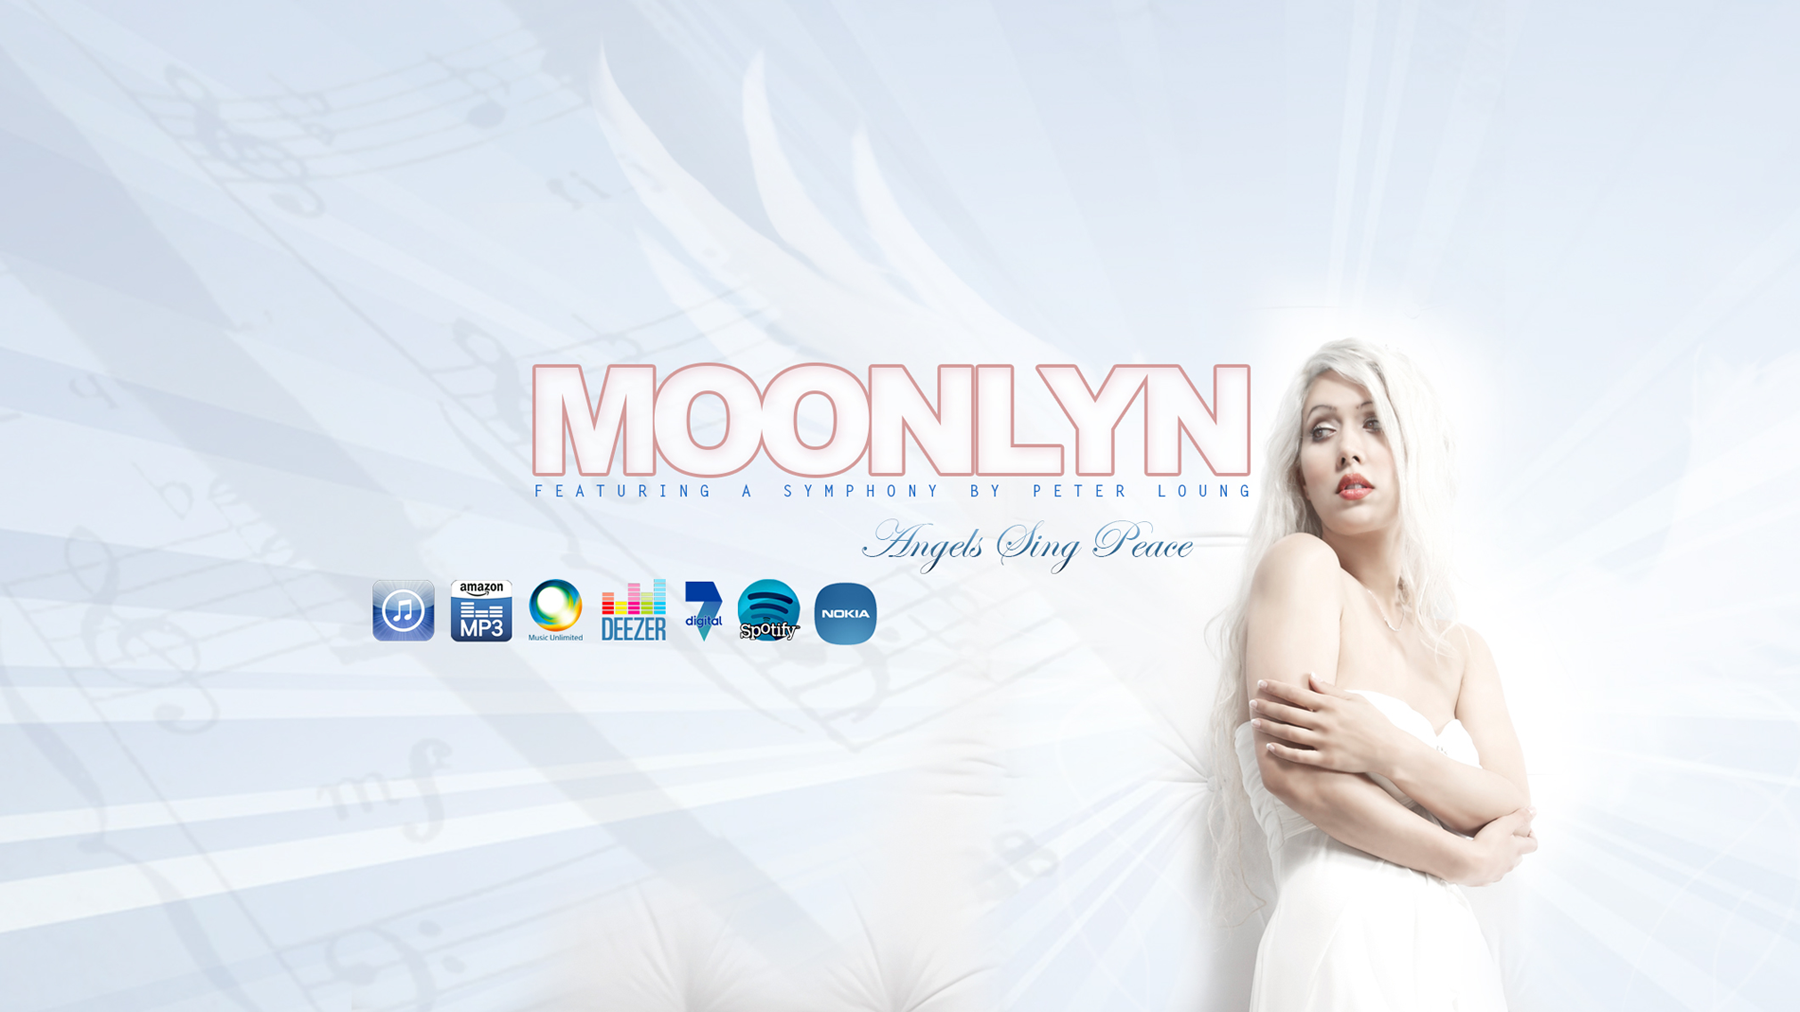 ASP_Youtube_Banner.png Moonlyn, Moonlyn Music, Moonlyn's official website, Angels Sing Peace, Moonlyn, Lolita, Geisha Lolita, Lolita song, Lolita Your Beauty Can Kill, Oh Lolita, Pretty Little Geisha Girl, Japanese Fashion, Style, Blonde Geisha